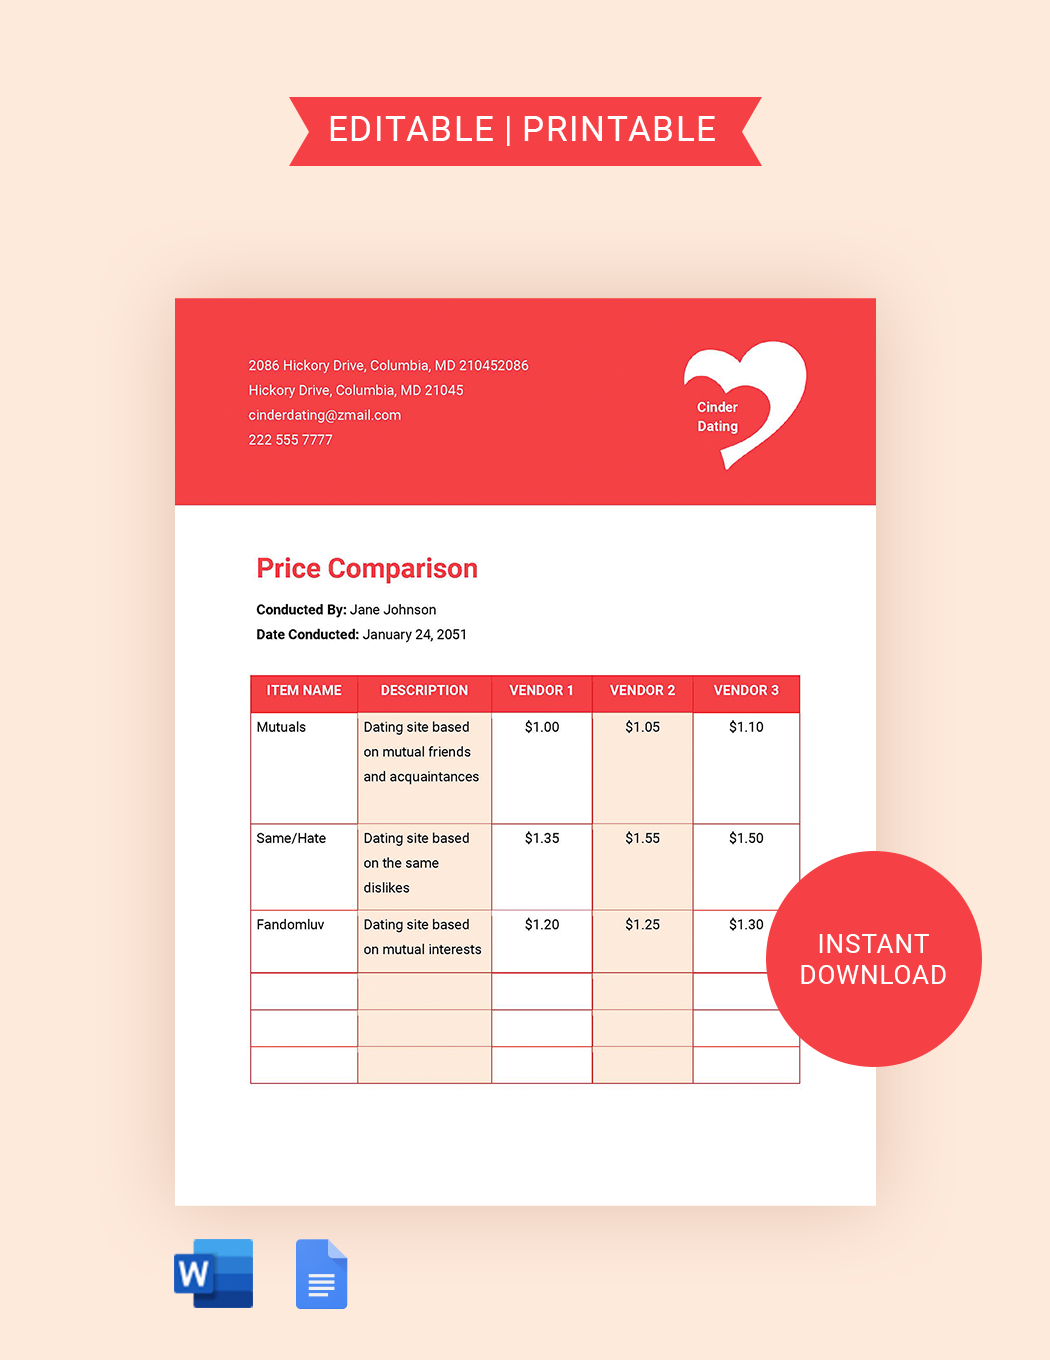 Dating Websites Price Comparison Template